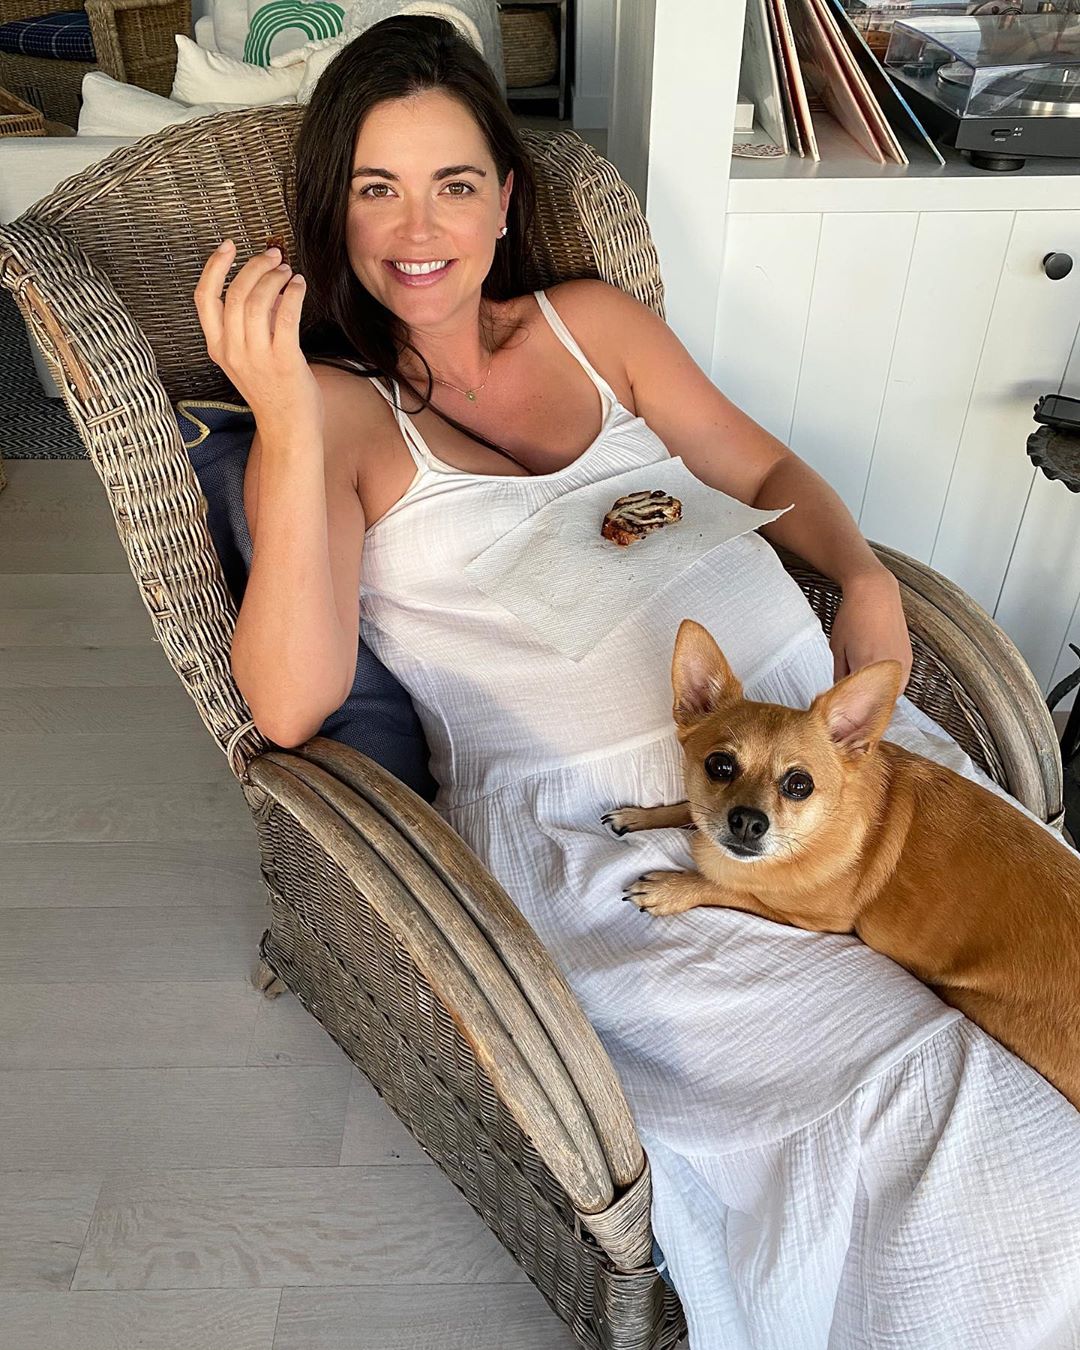 Where Does Katie Lee Live? Photos Inside Her Hamptons House